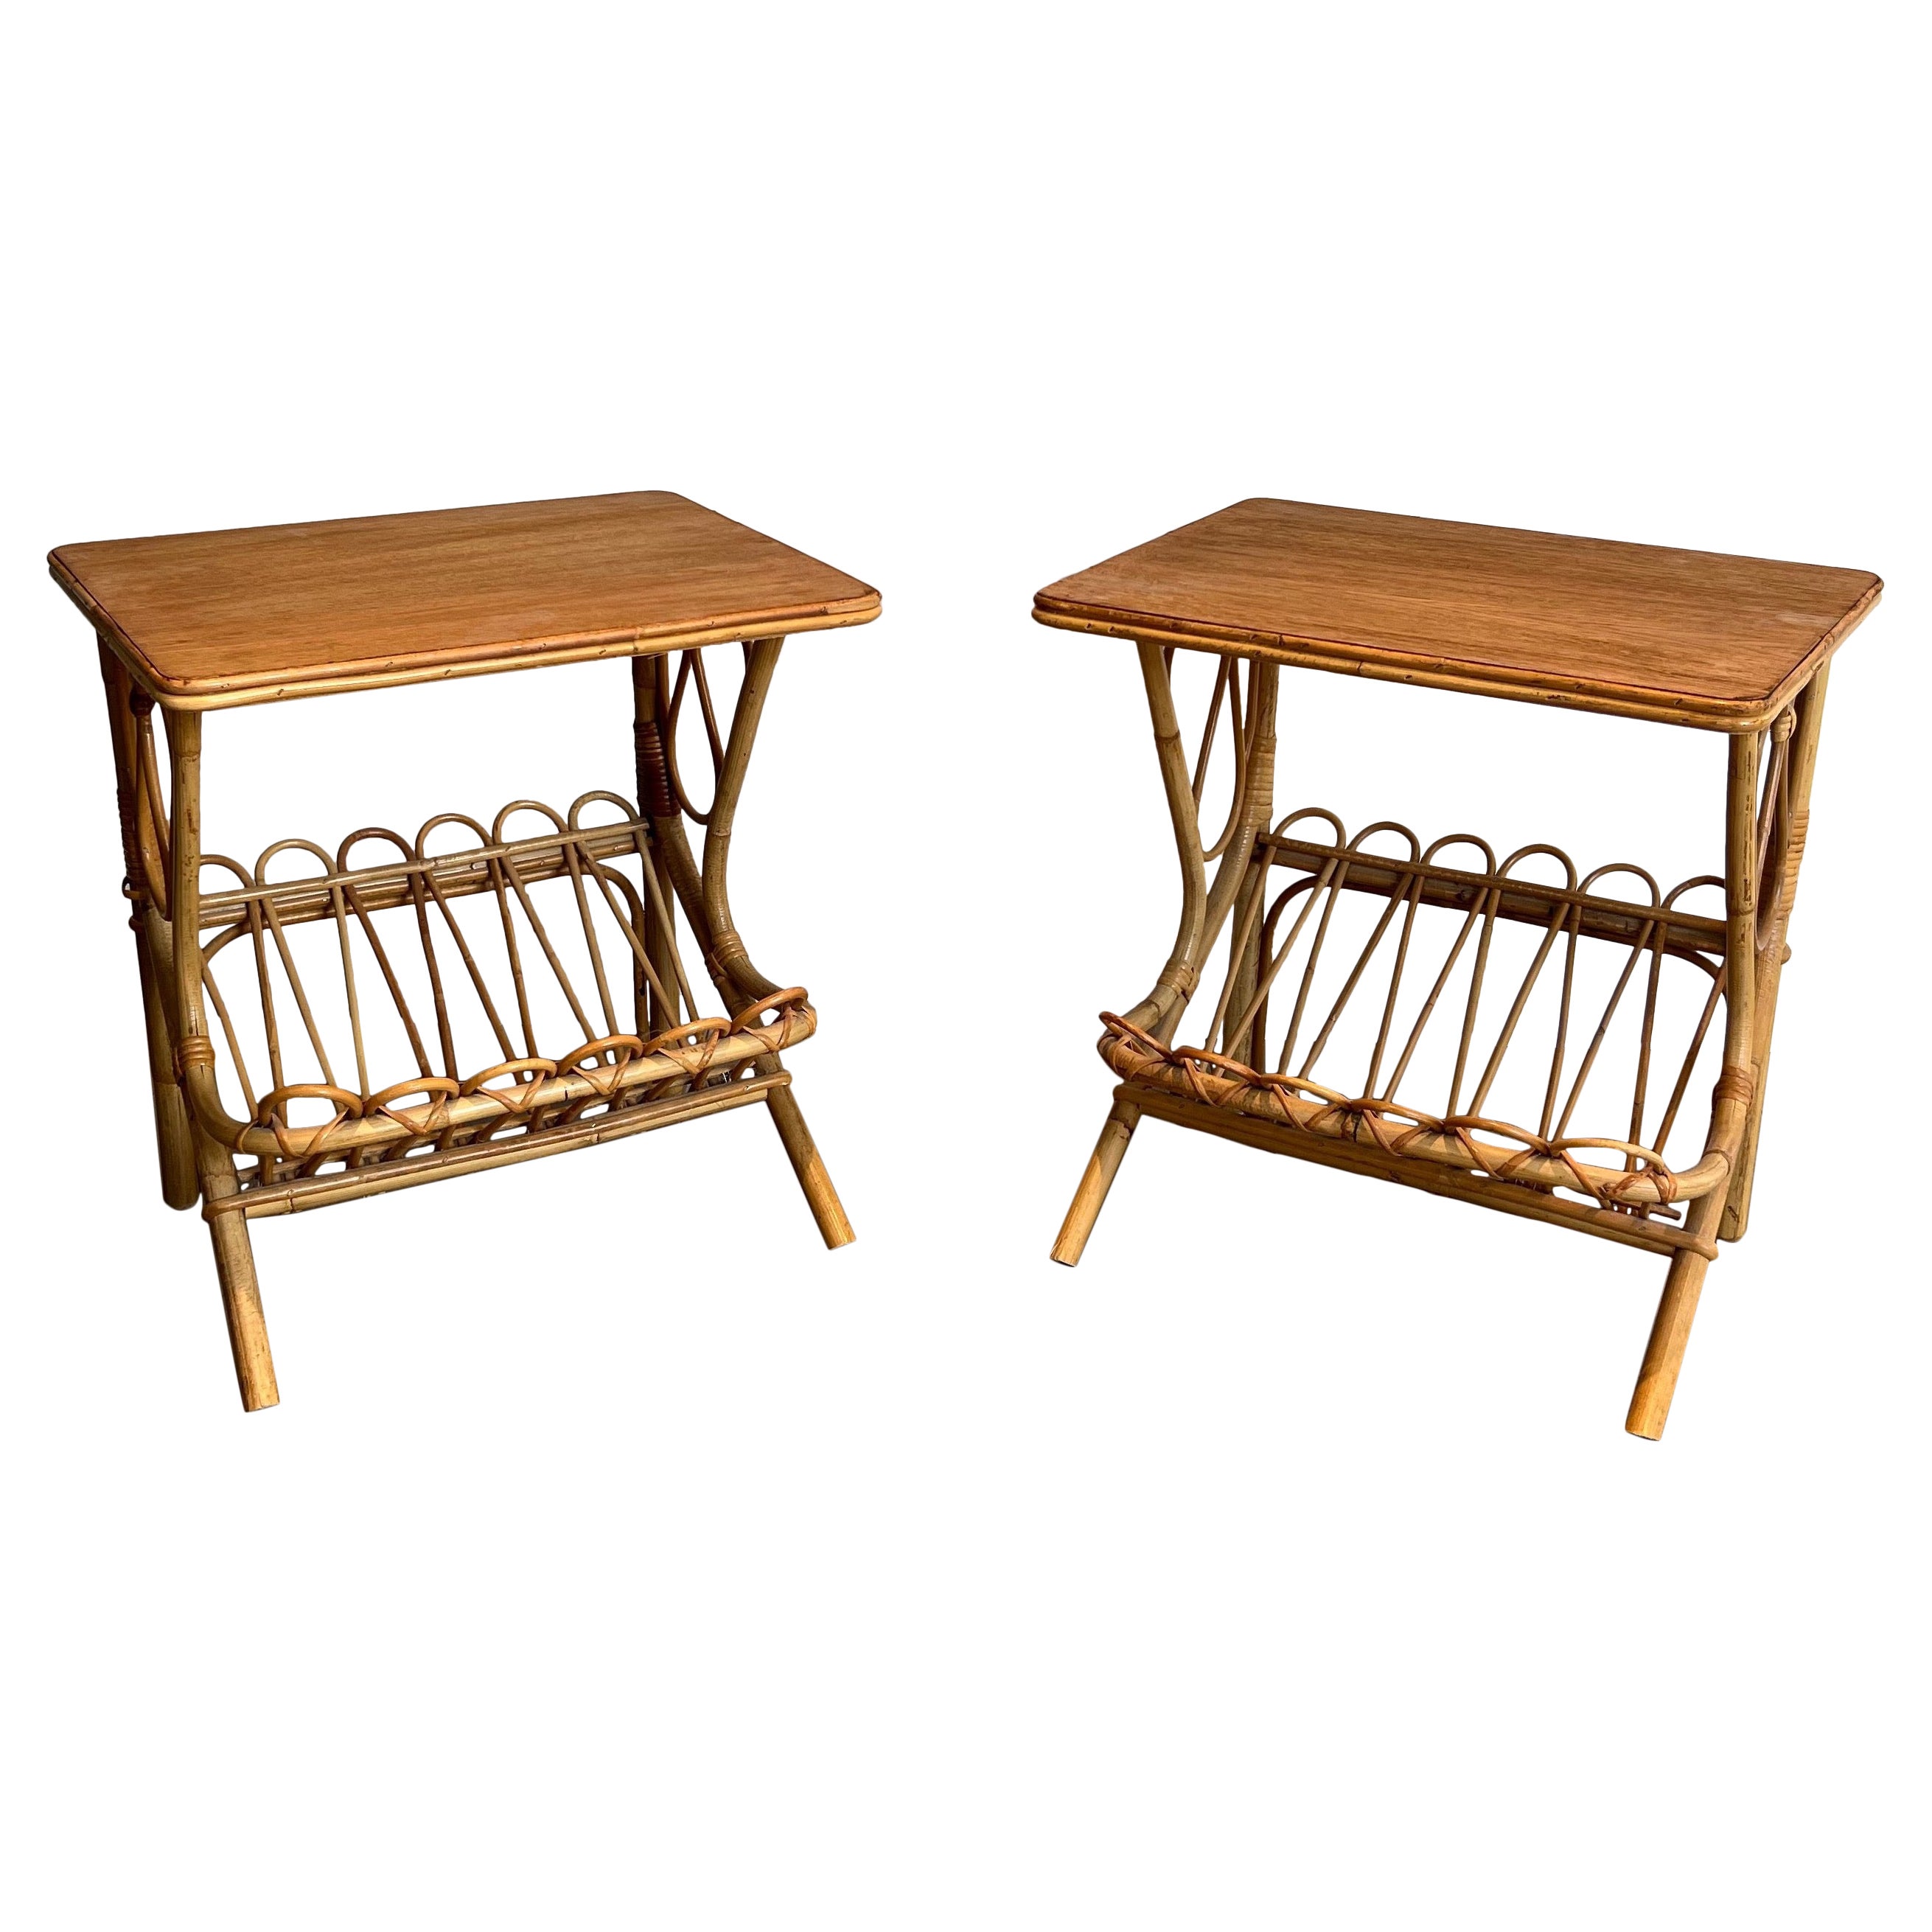 Pair of Rattan Side Tables Magazine Racks For Sale